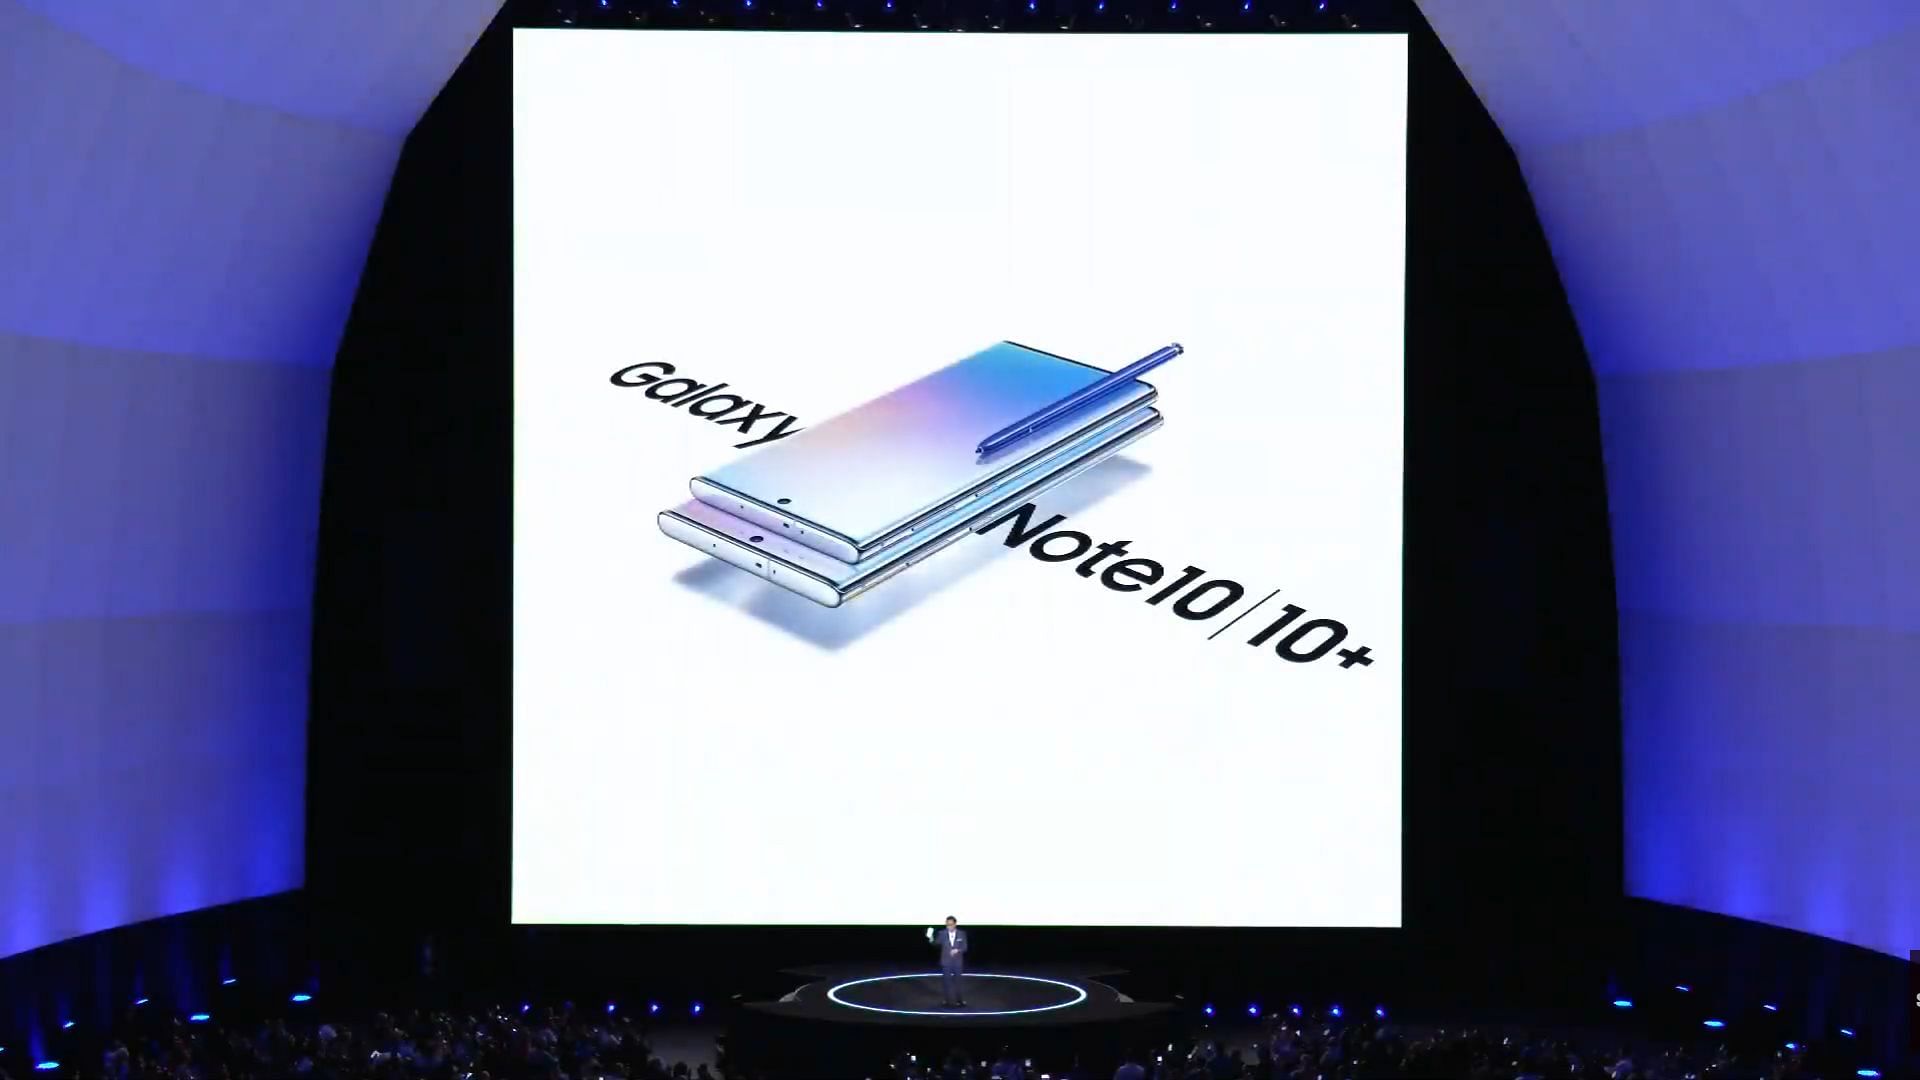 Galaxy Note 10 from Samsung has been announced.